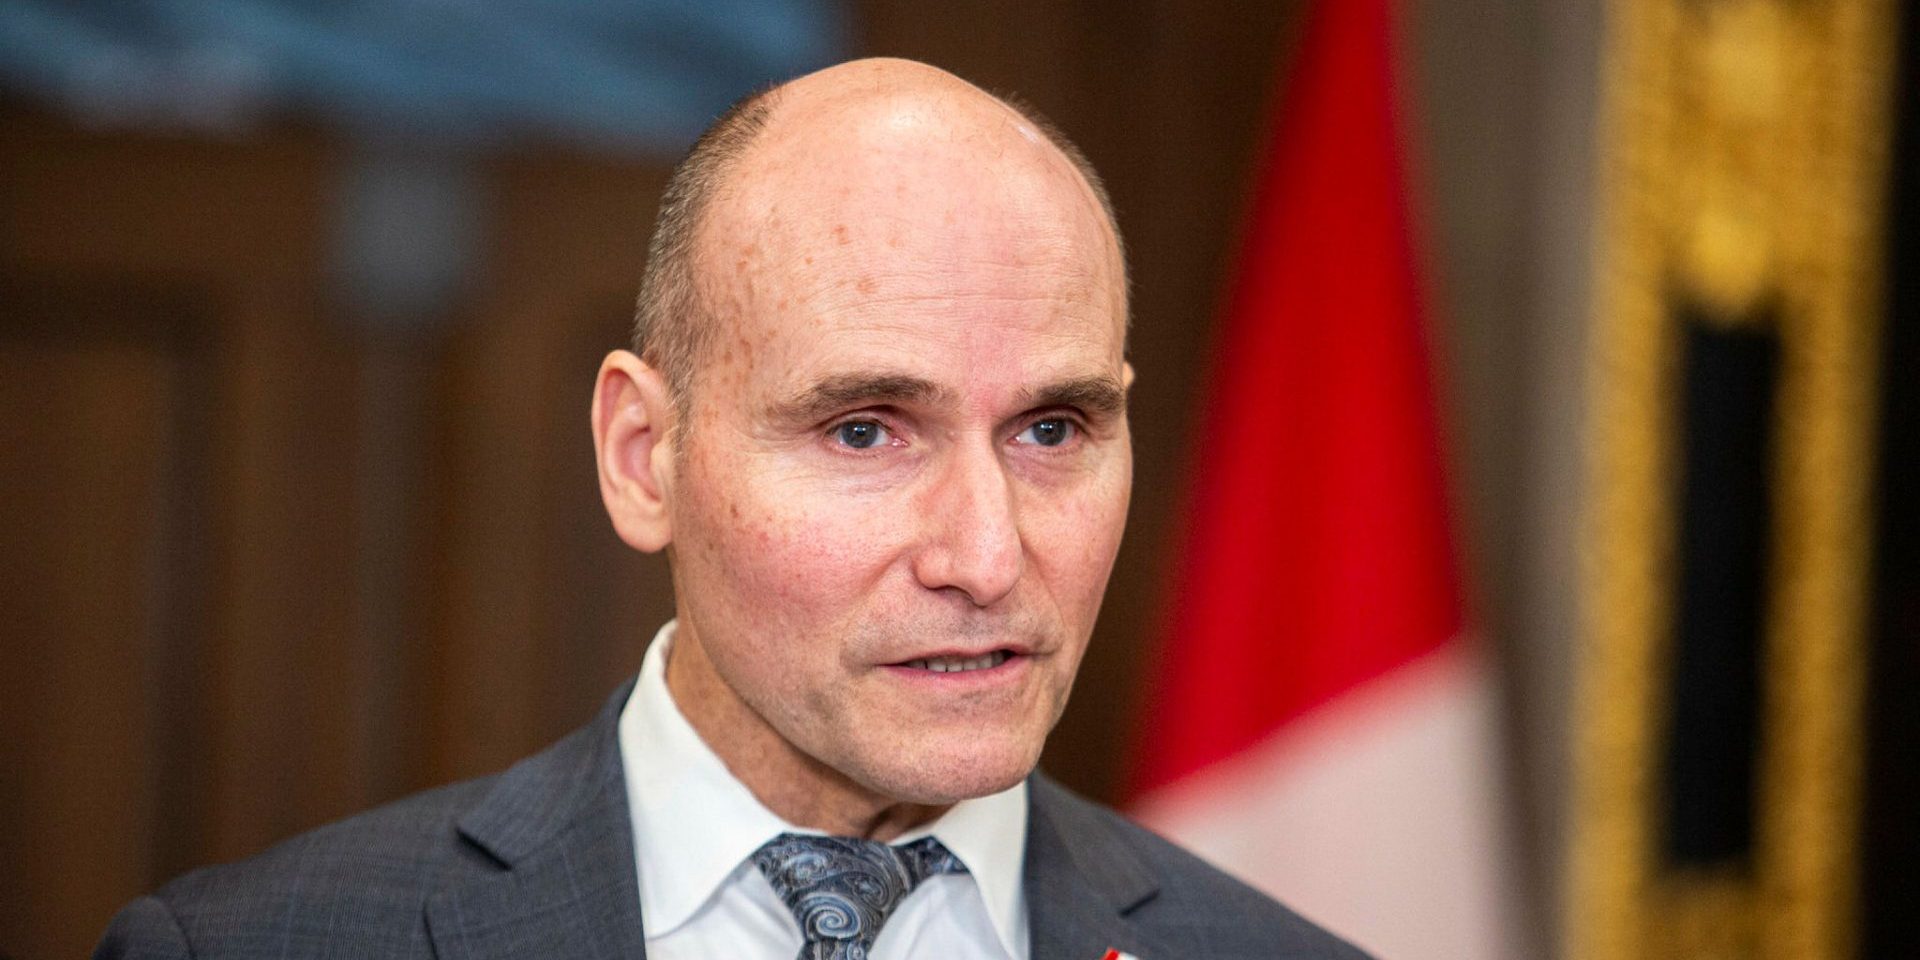 Minister of Public Services and Procurement Jean-Yves Duclos. The Hill Times photograph by Andrew Meade